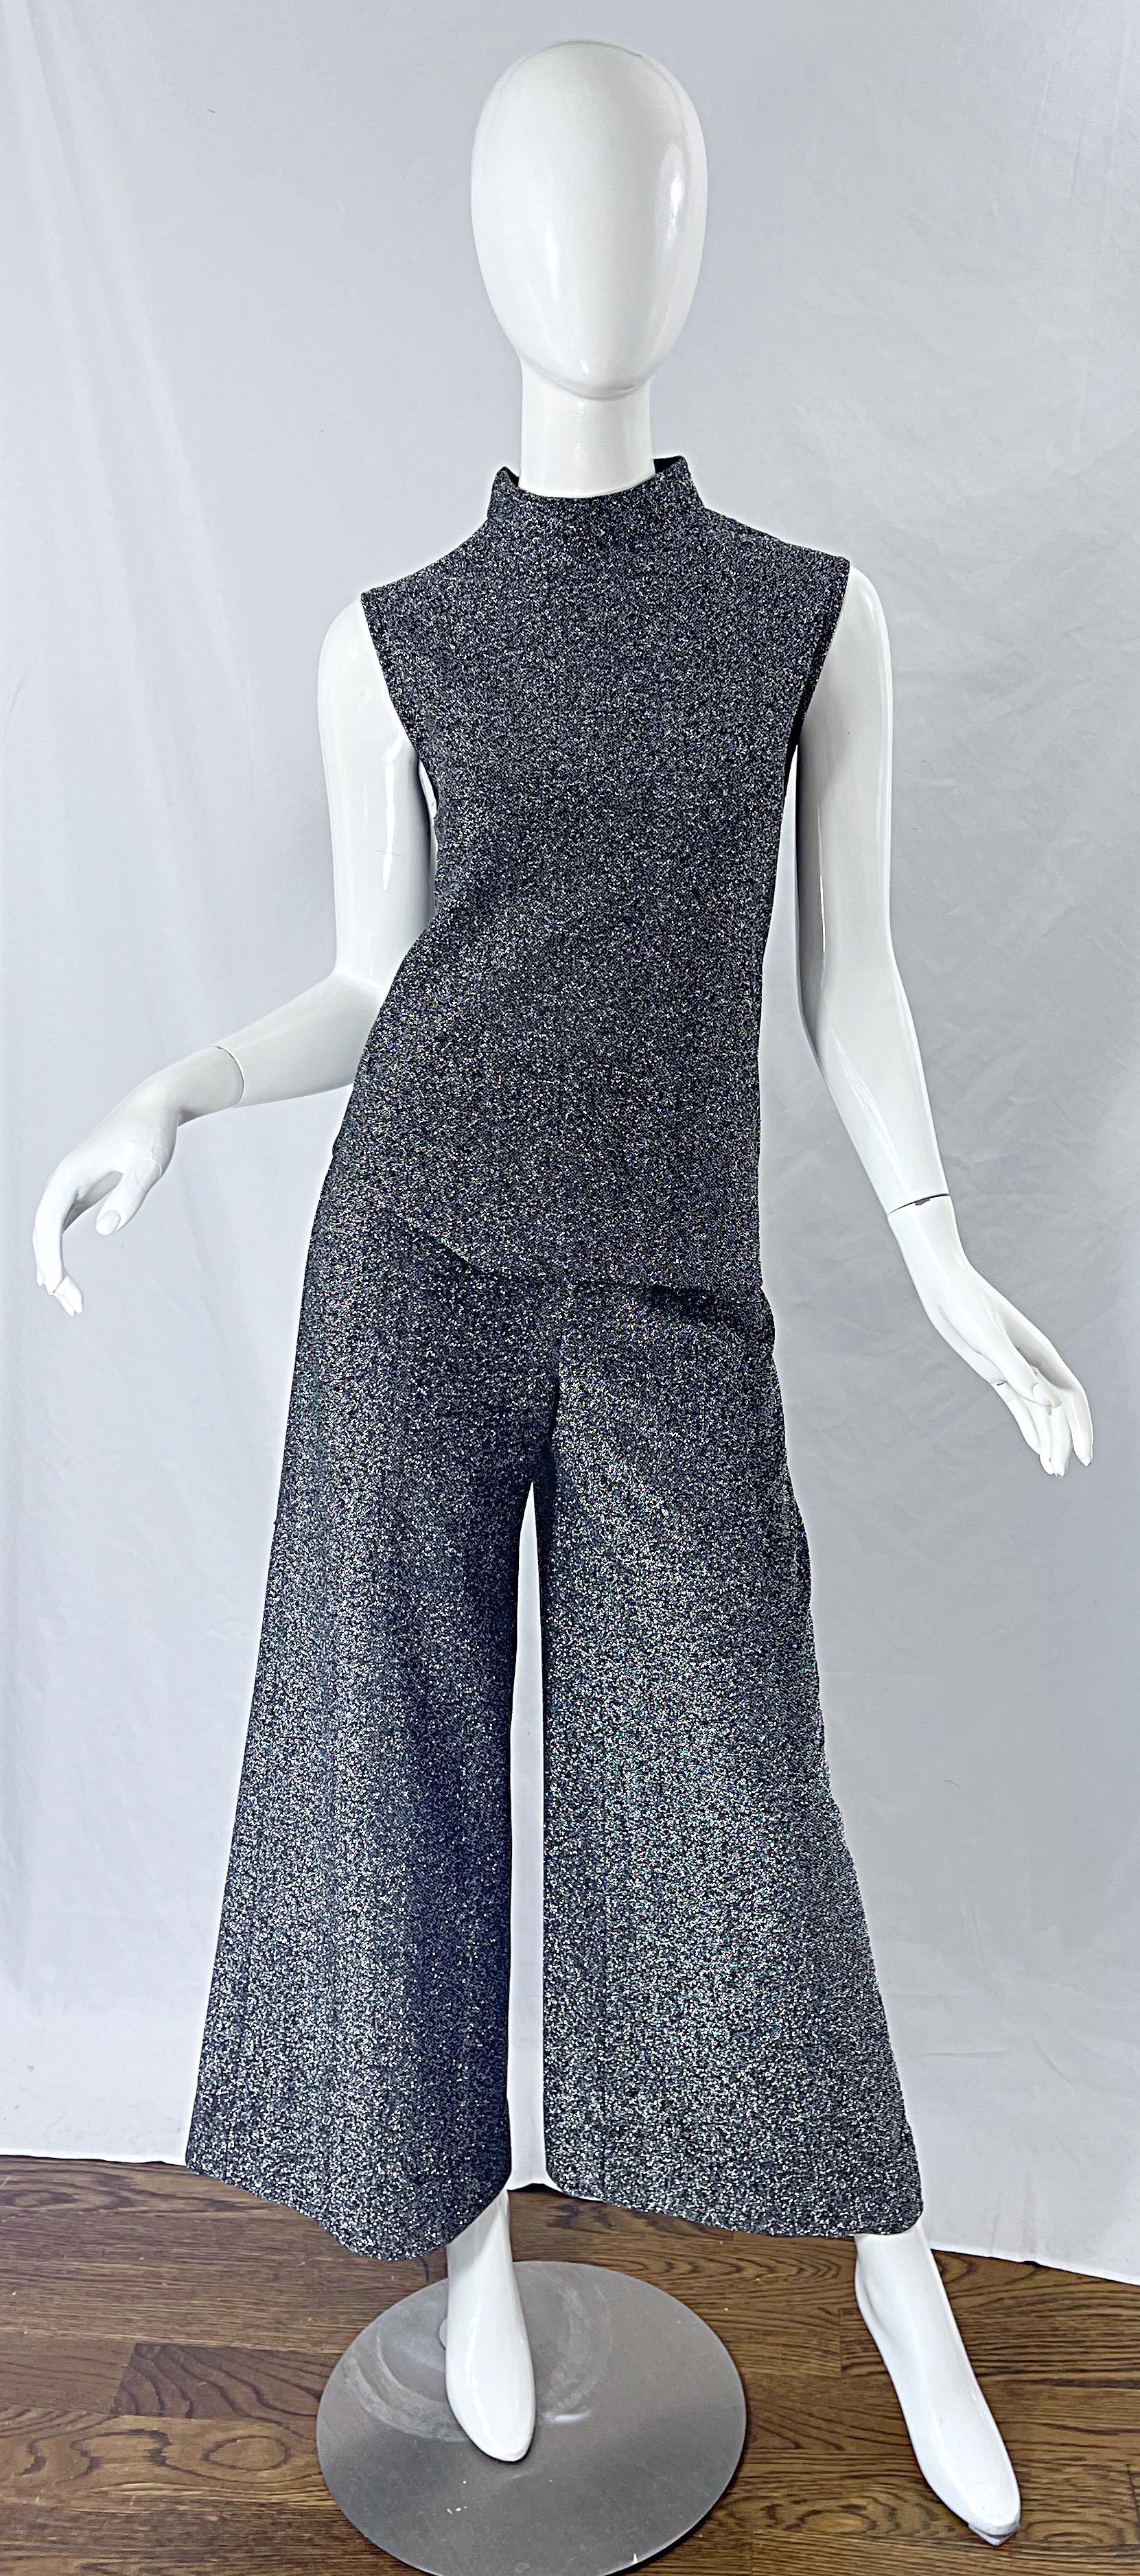 Amazing vintage 70s SUSAN THOAS gunmetal silver metallic top and wide leg palazzo pants ensemble ! Top has a high neck and metal zipper up the center top back. High waisted palazzo pants feature a metal zipper up the center back with hook-and-eye